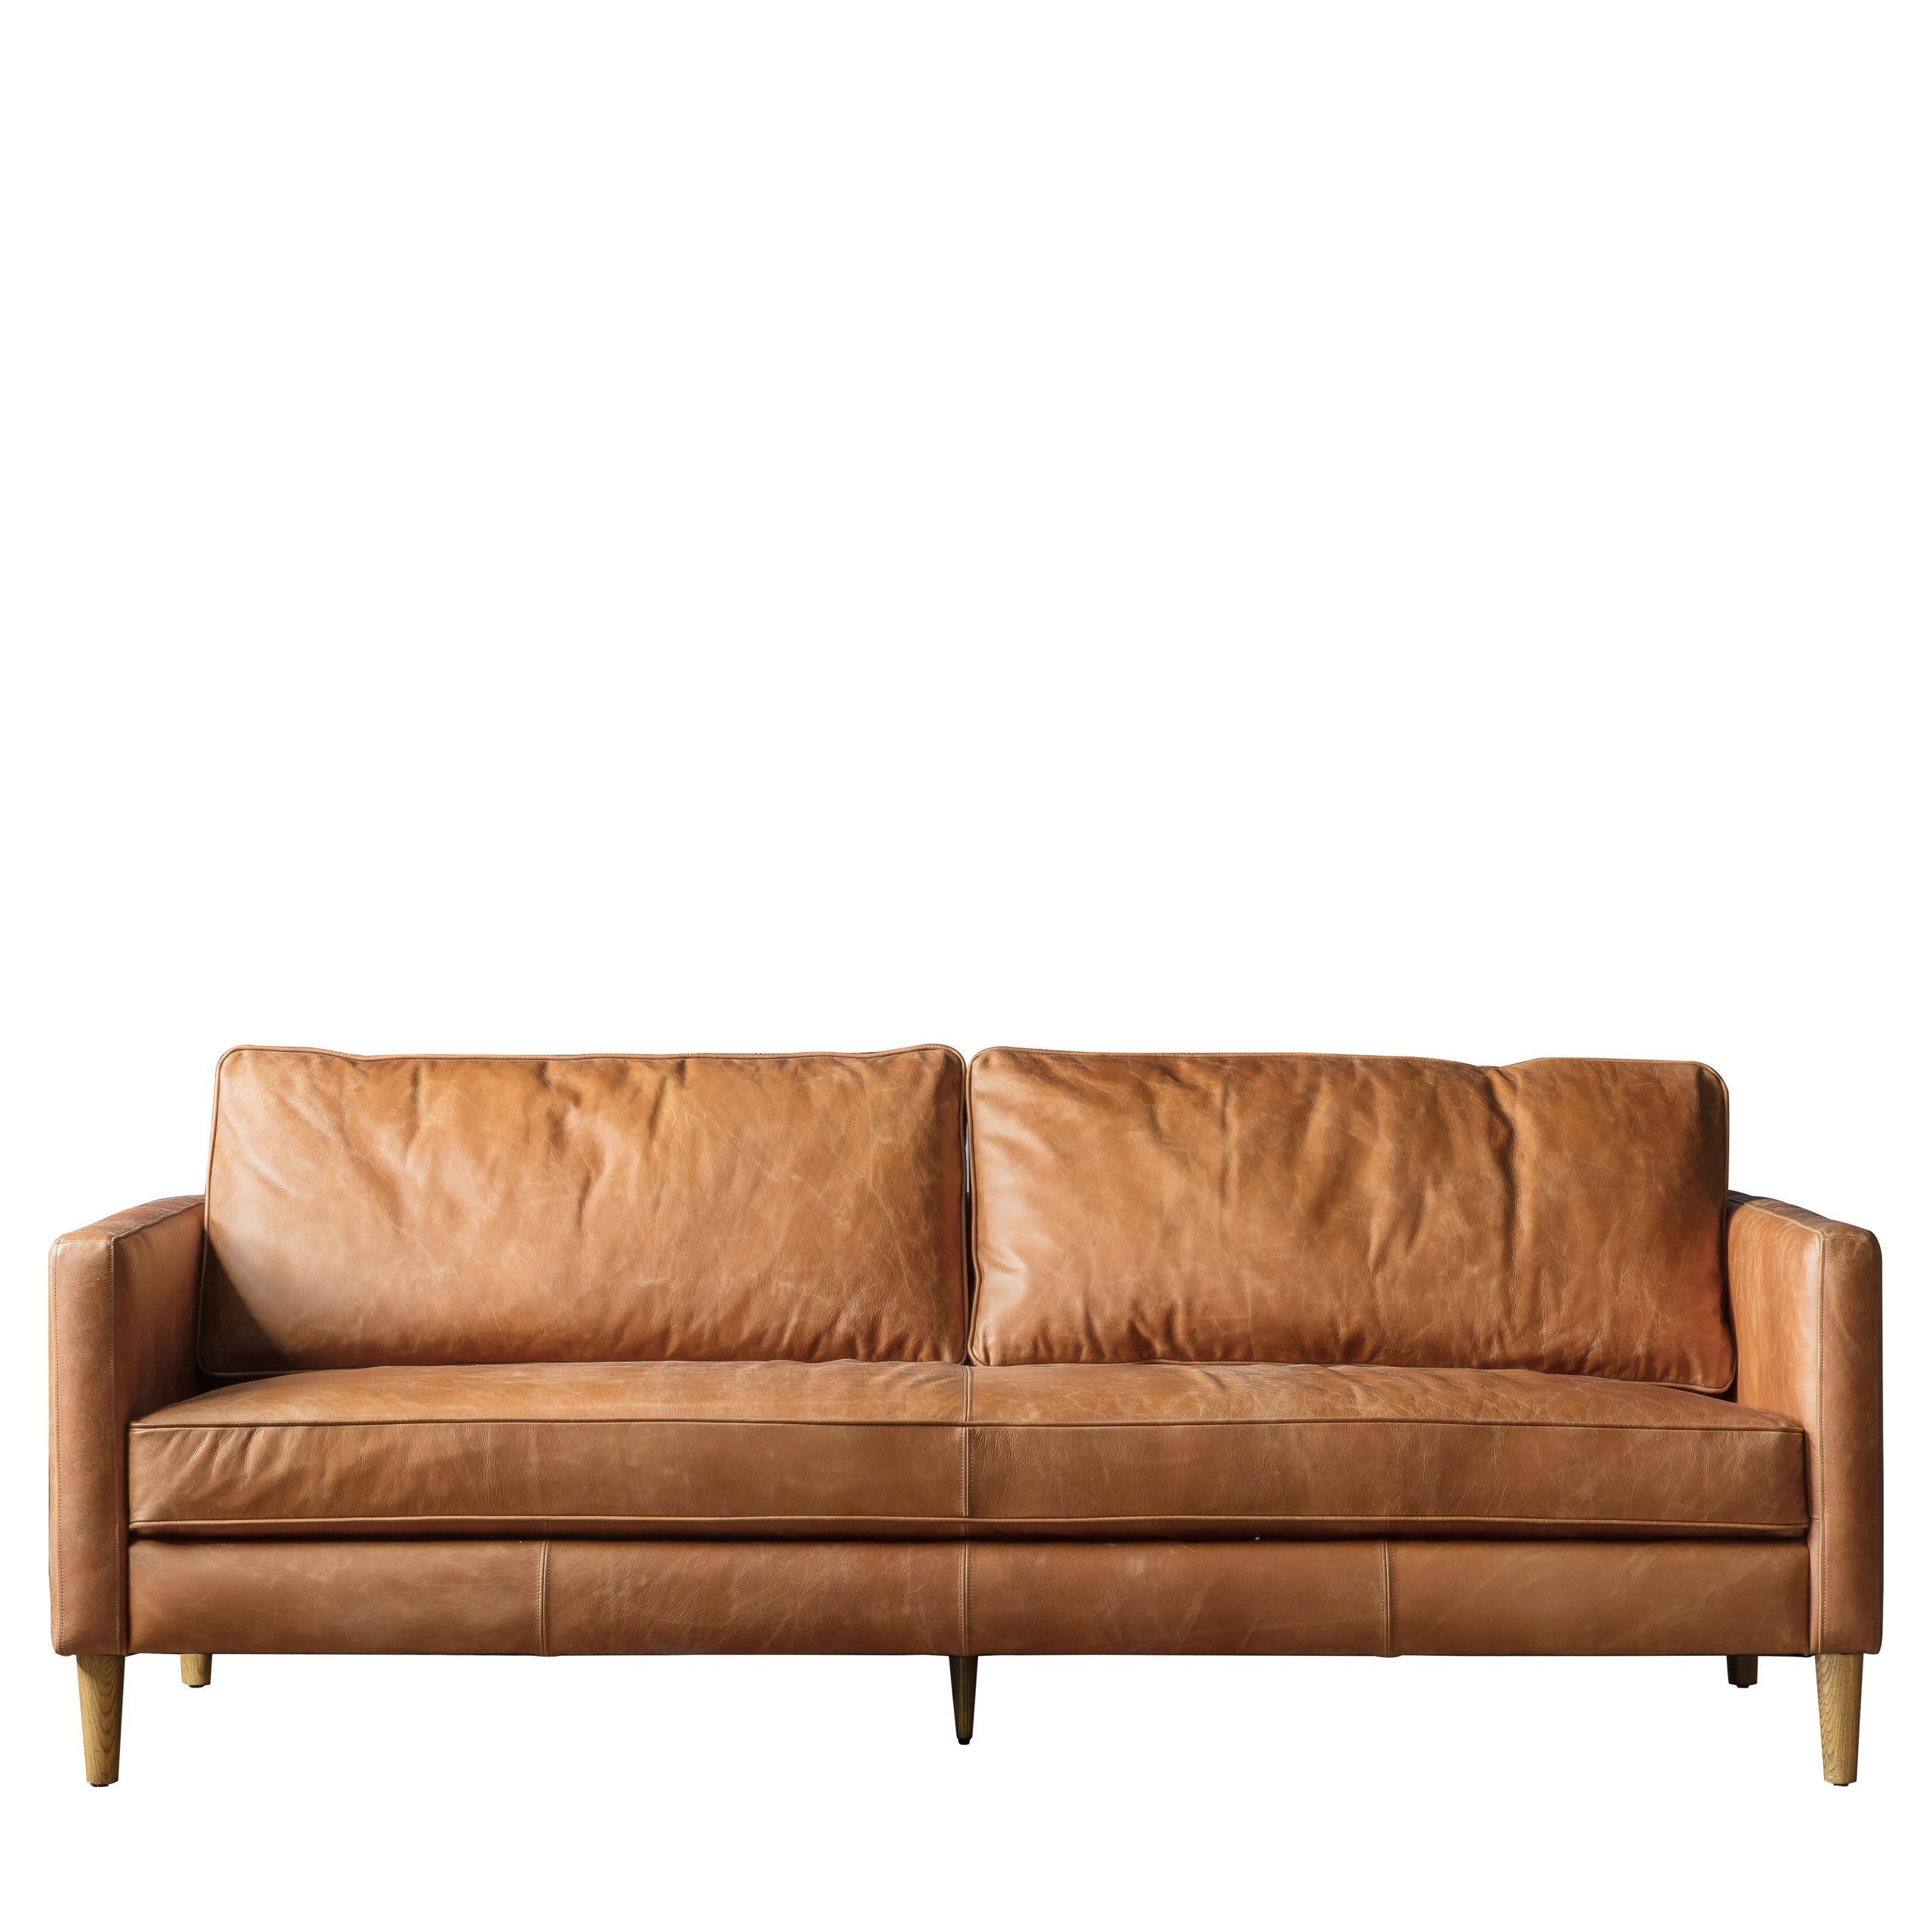 Gallery Direct Osborne 2 Seater Sofa Vintage Brown Leather